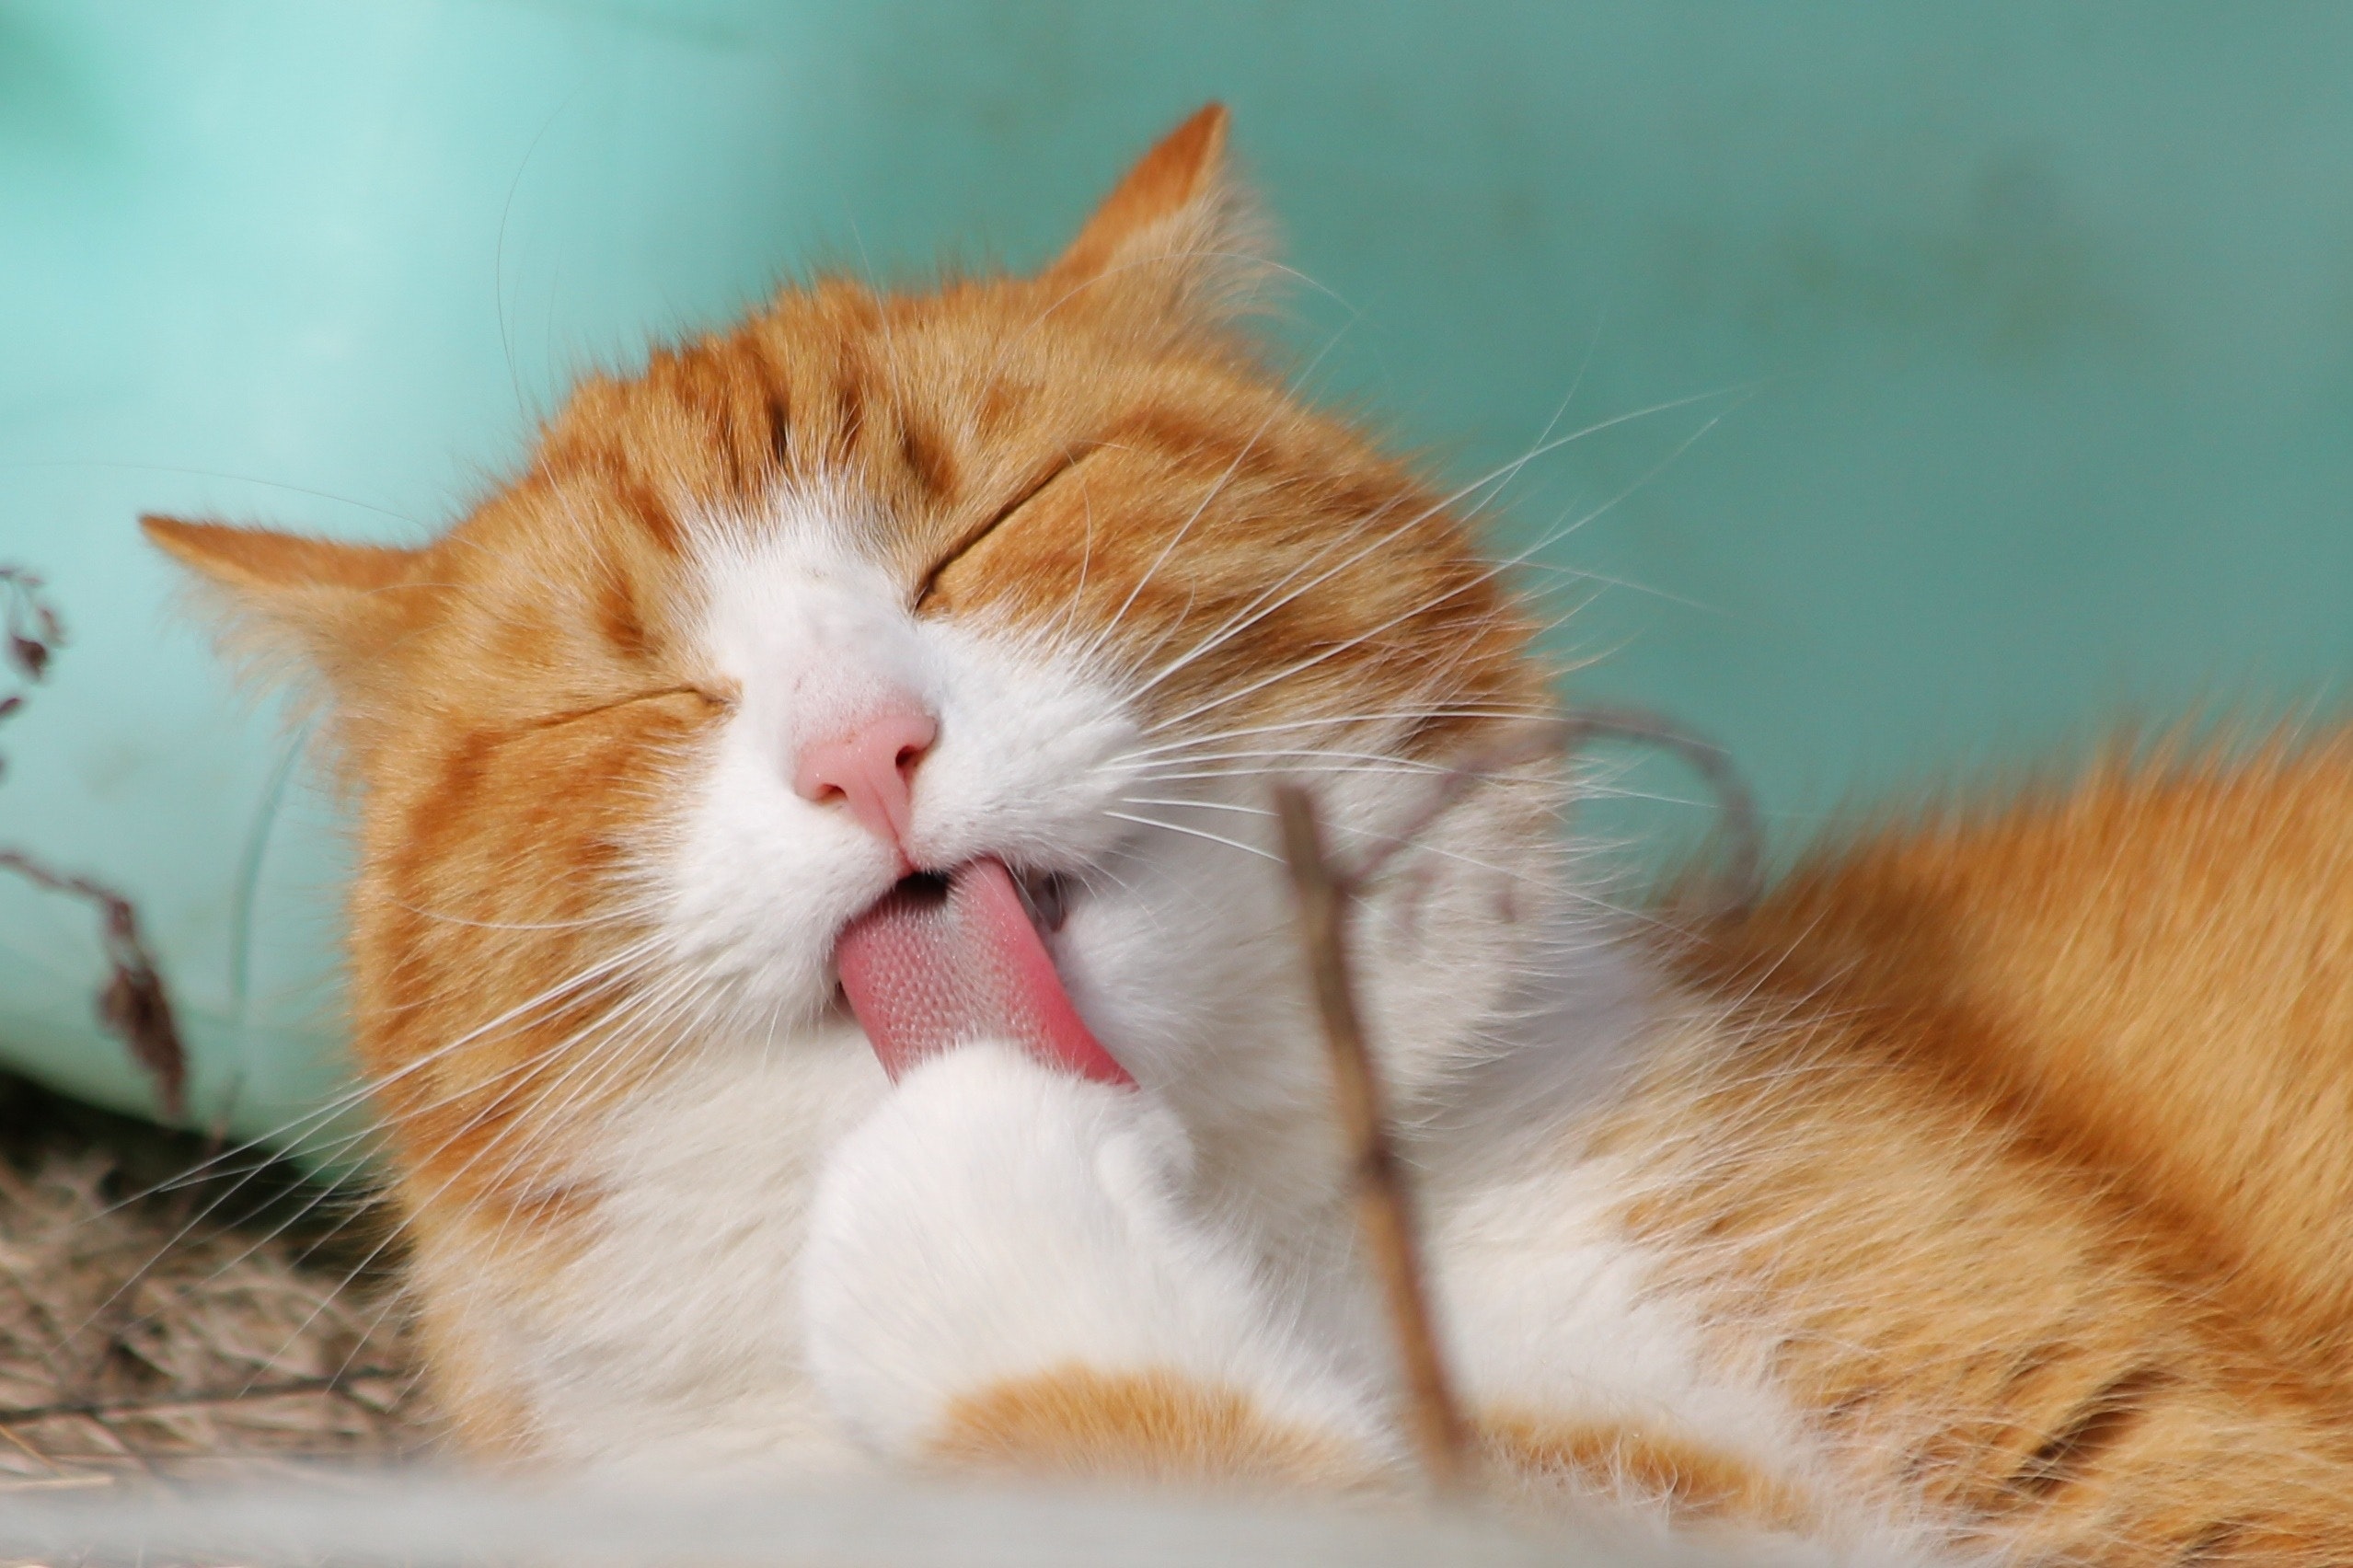 Orange tabby cat licking its paw with a turquoise wall in the background